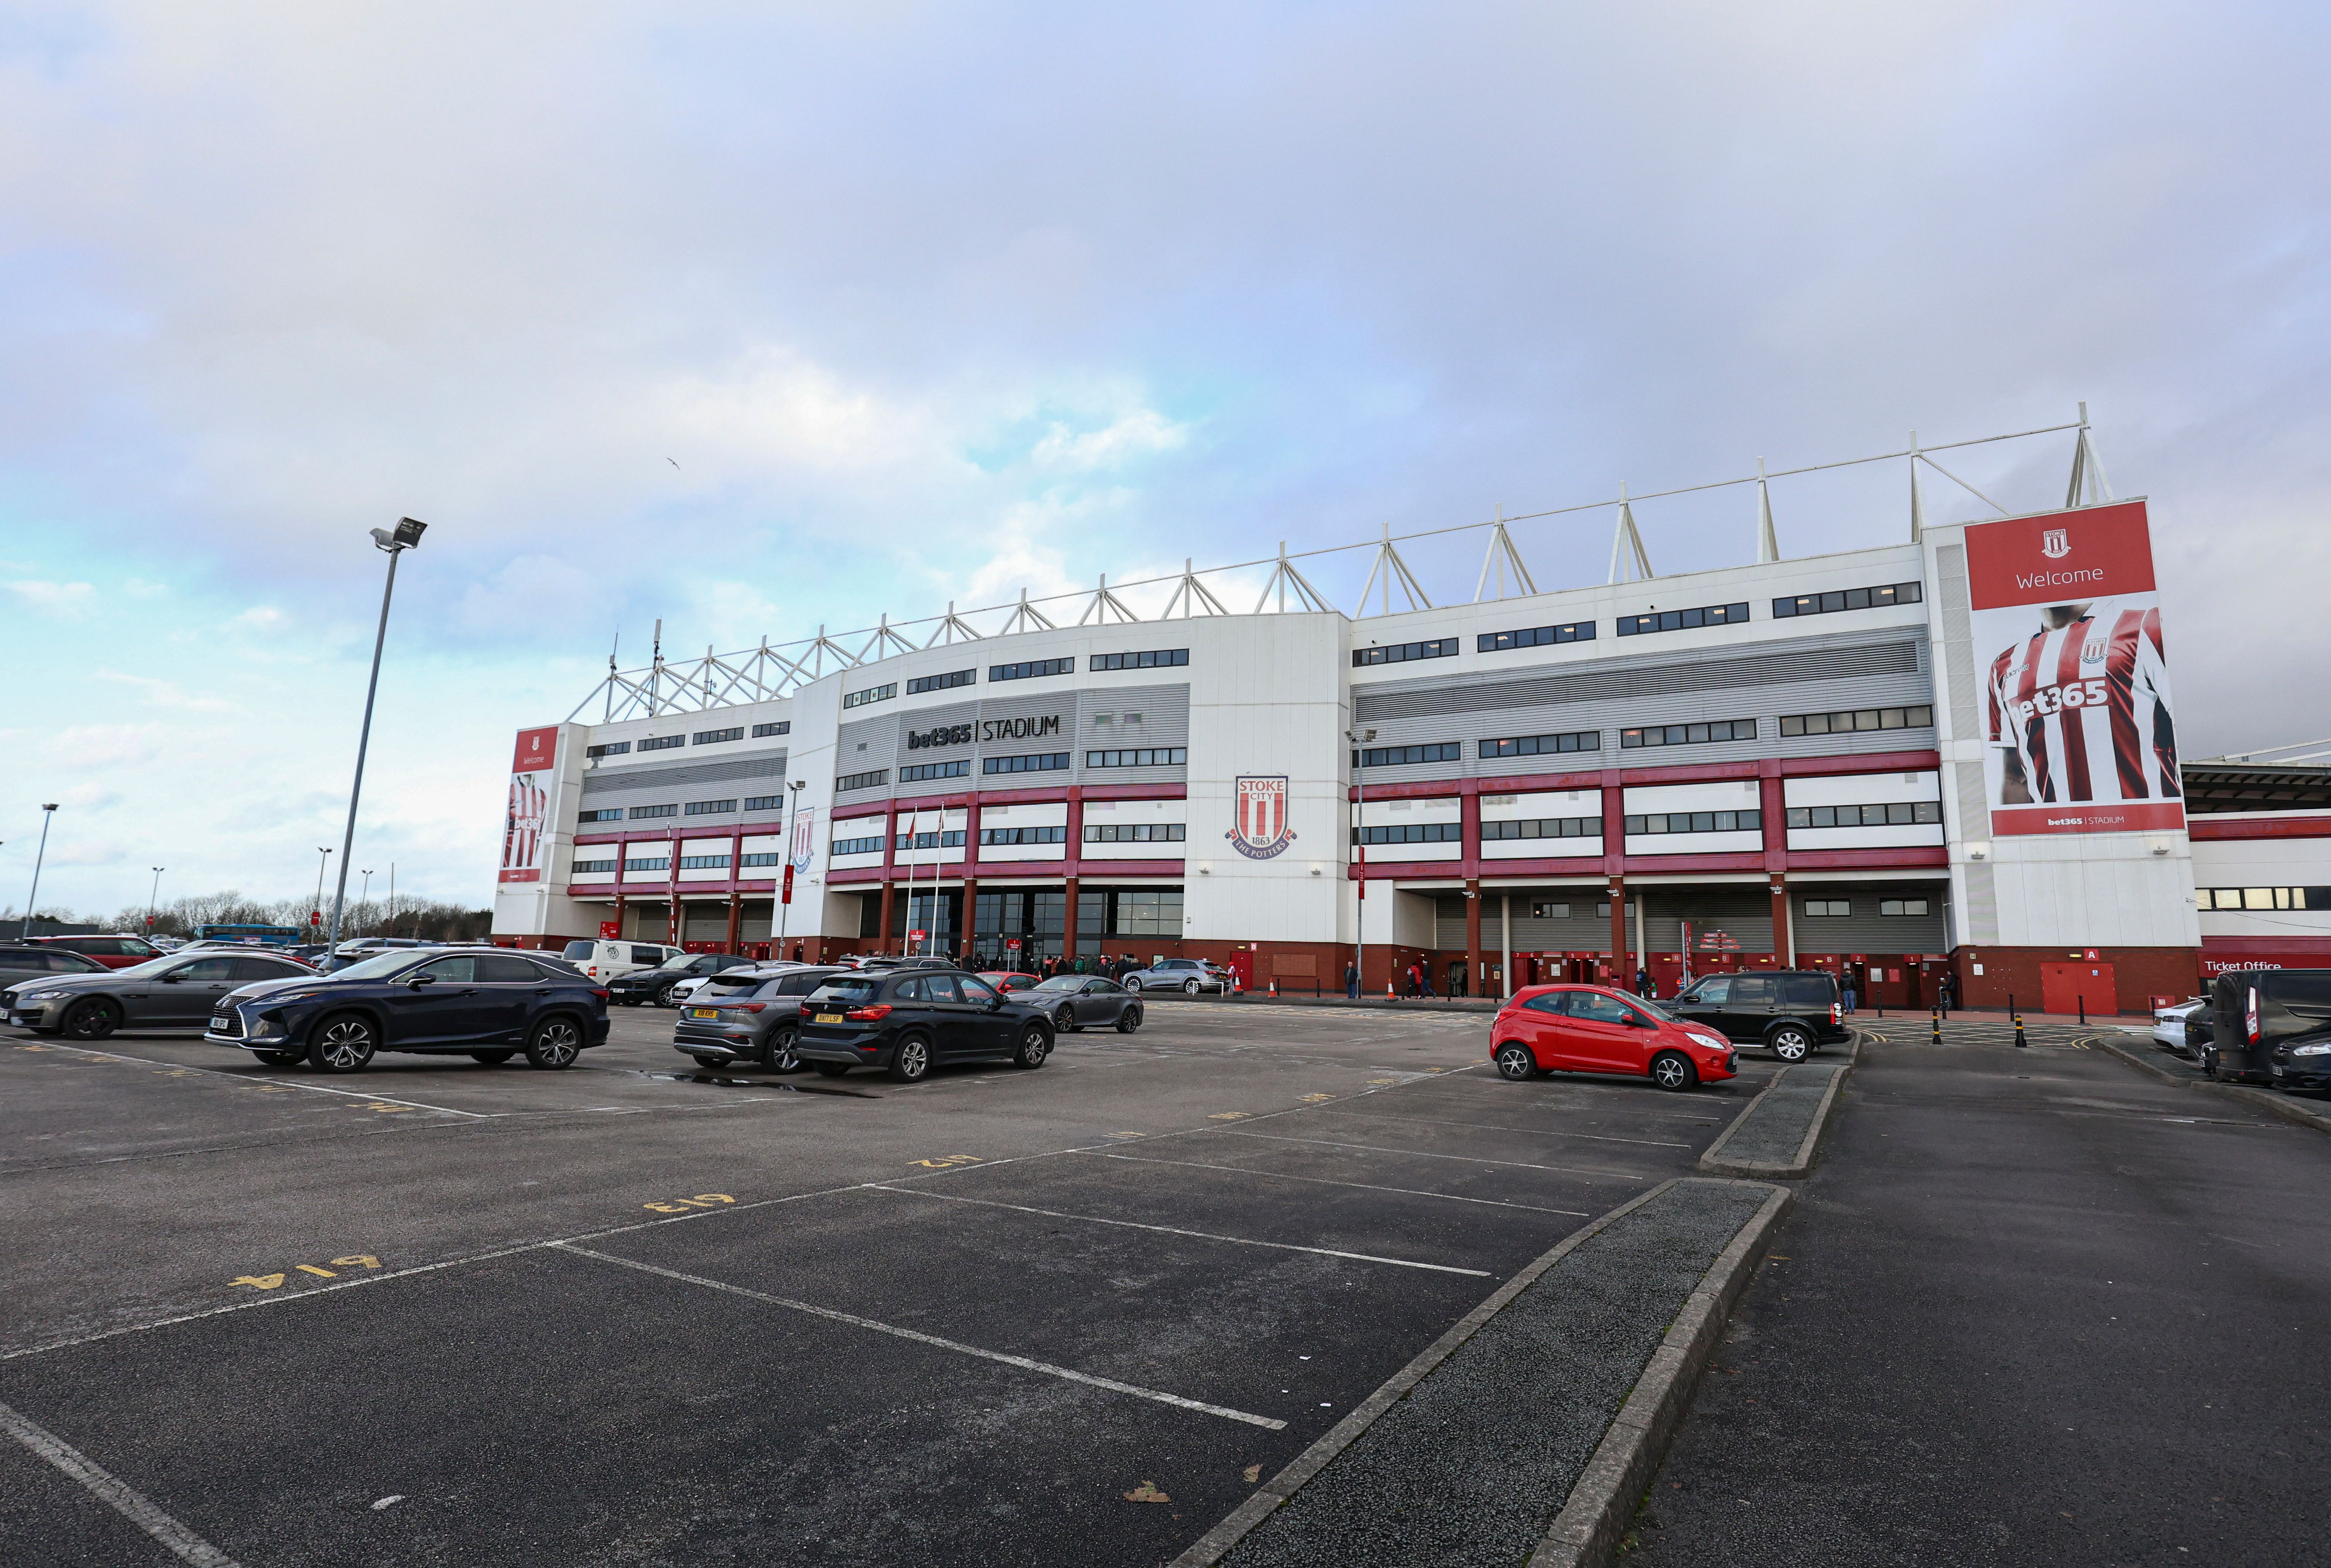 A general view of the car park and main stand at the bet365 Stadium